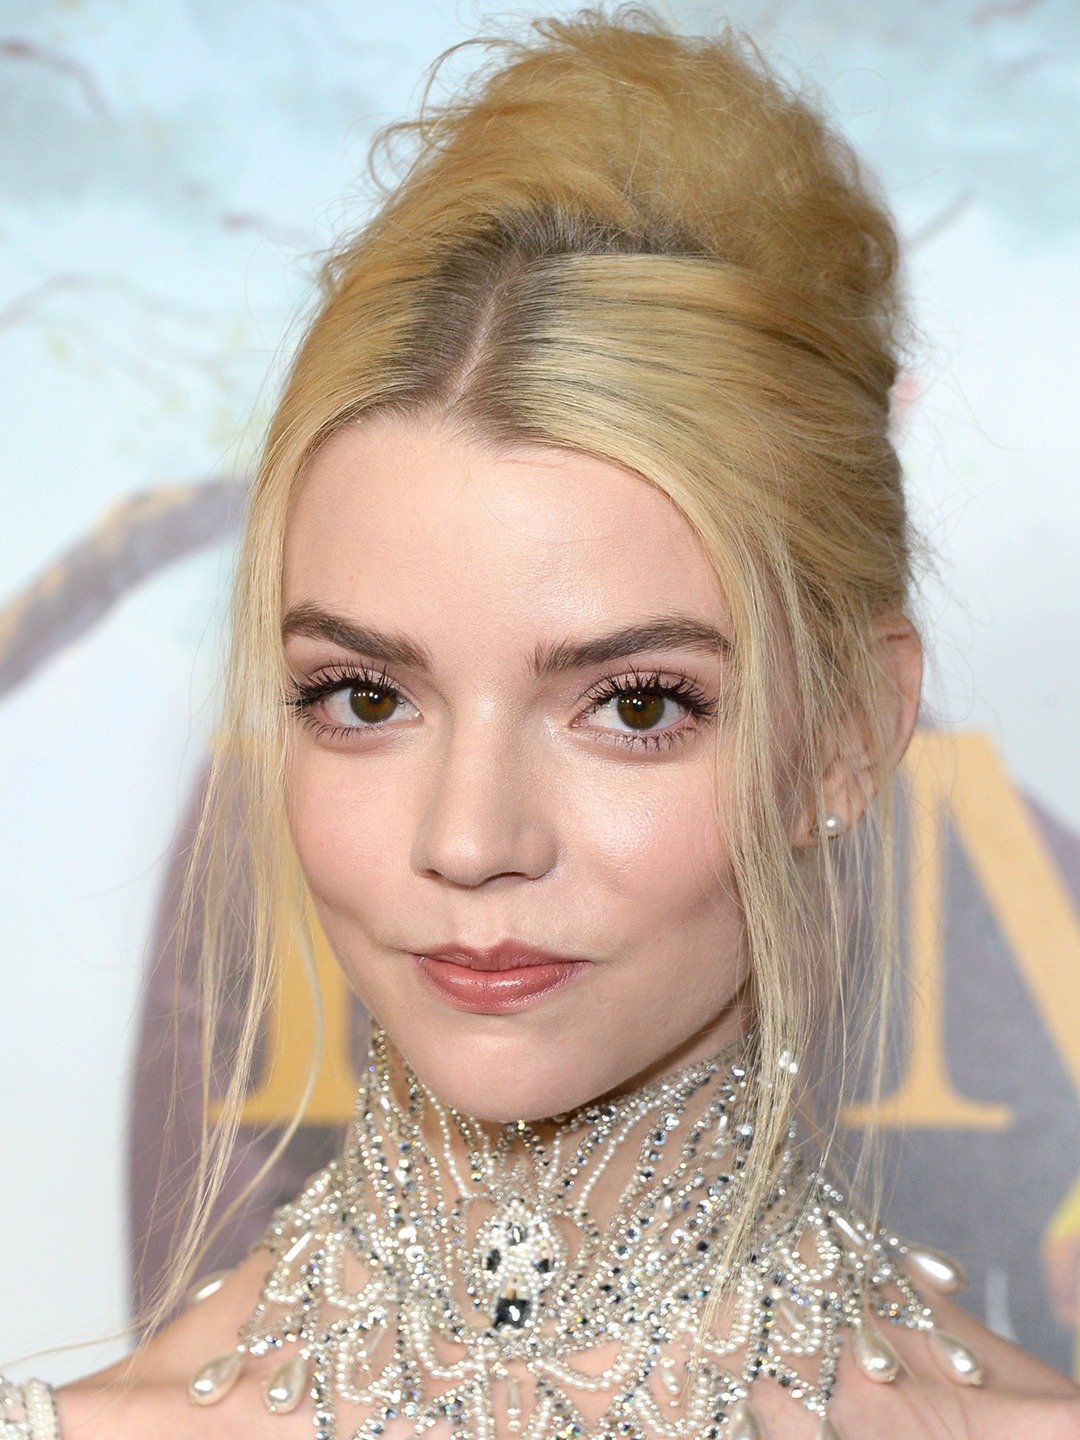 The Best Anya Taylor-Joy Movies to Watch Before 'The Menu